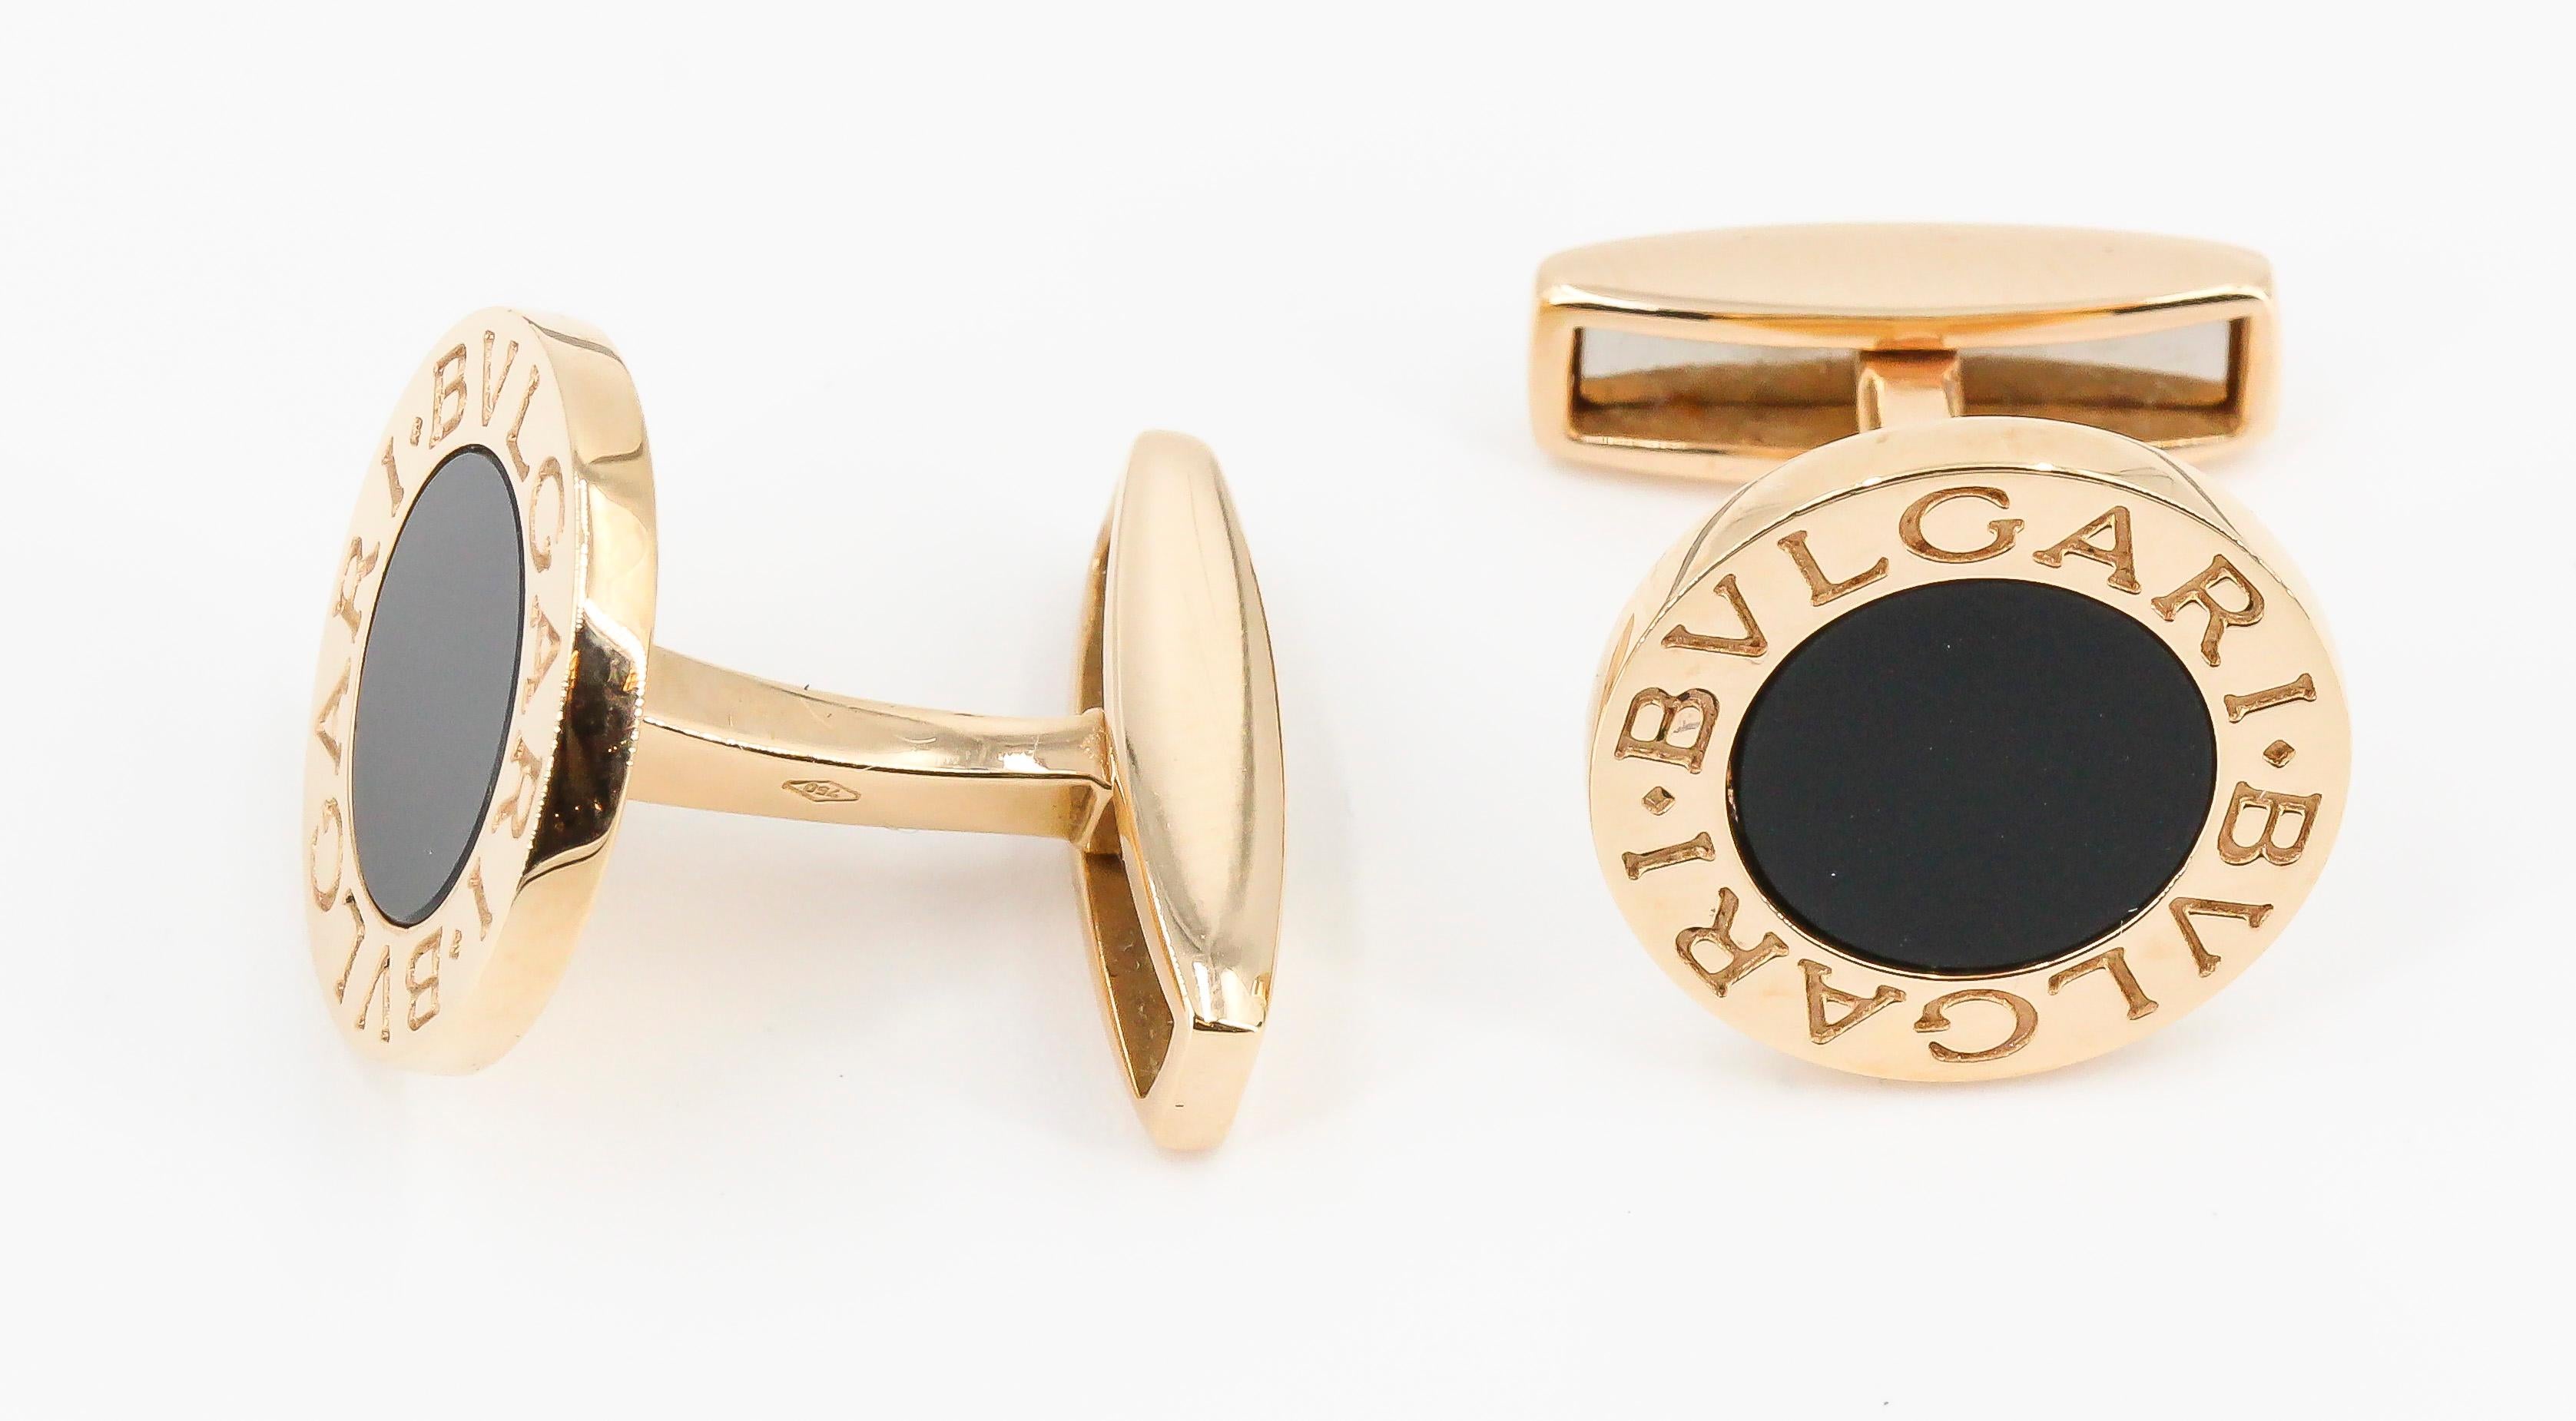 Handsome inlaid onyx and 18K yellow gold round cufflinks by Bulgari. They feature black onyx inlays in the middle over an 18K gold setting with 